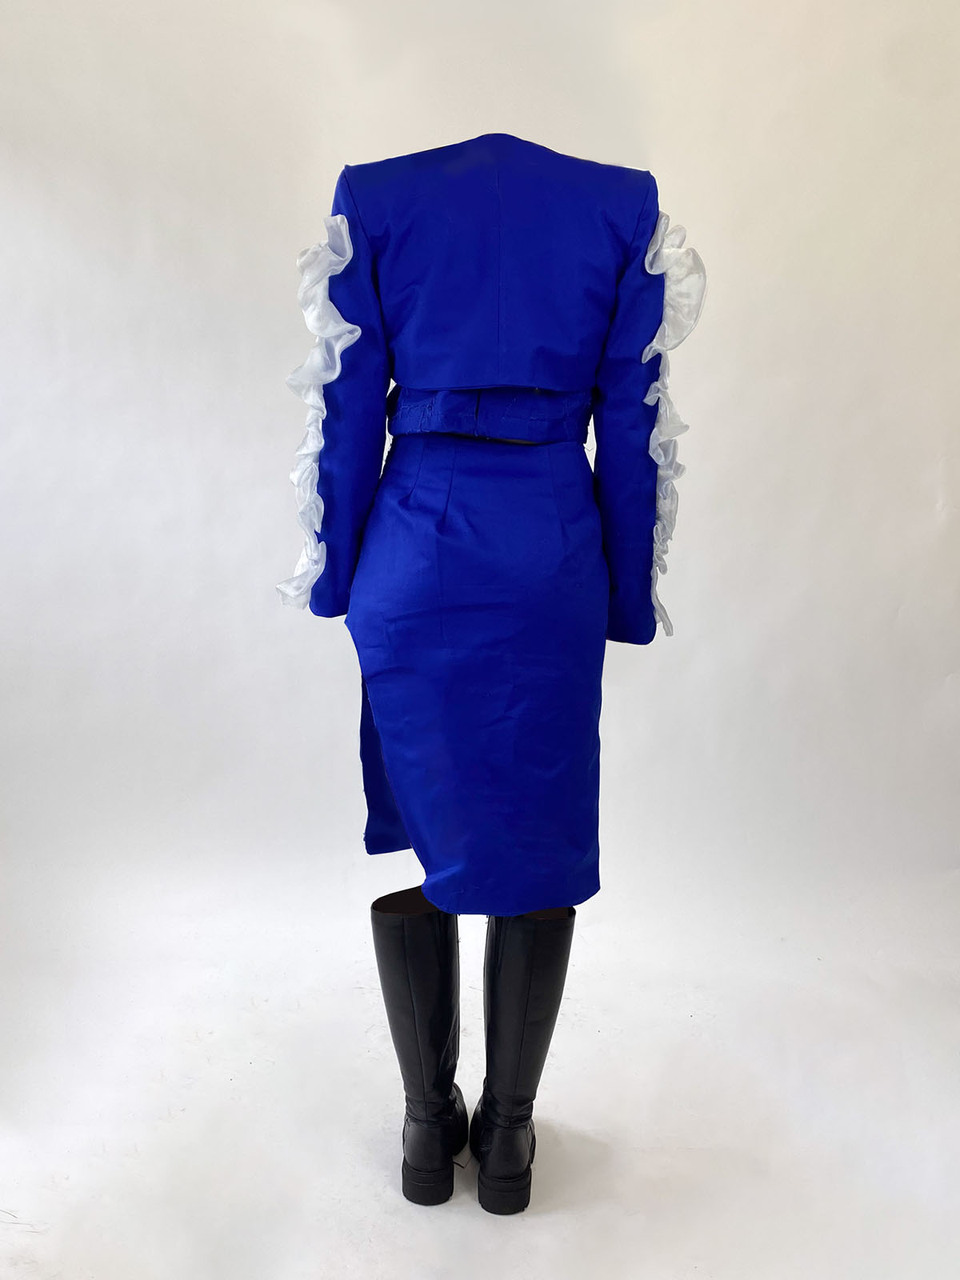 Rear view of blue collarless skirt suit with crimped white lace details on the outer sleeves and knee length black flat soled boots by Gosia Czerwinska